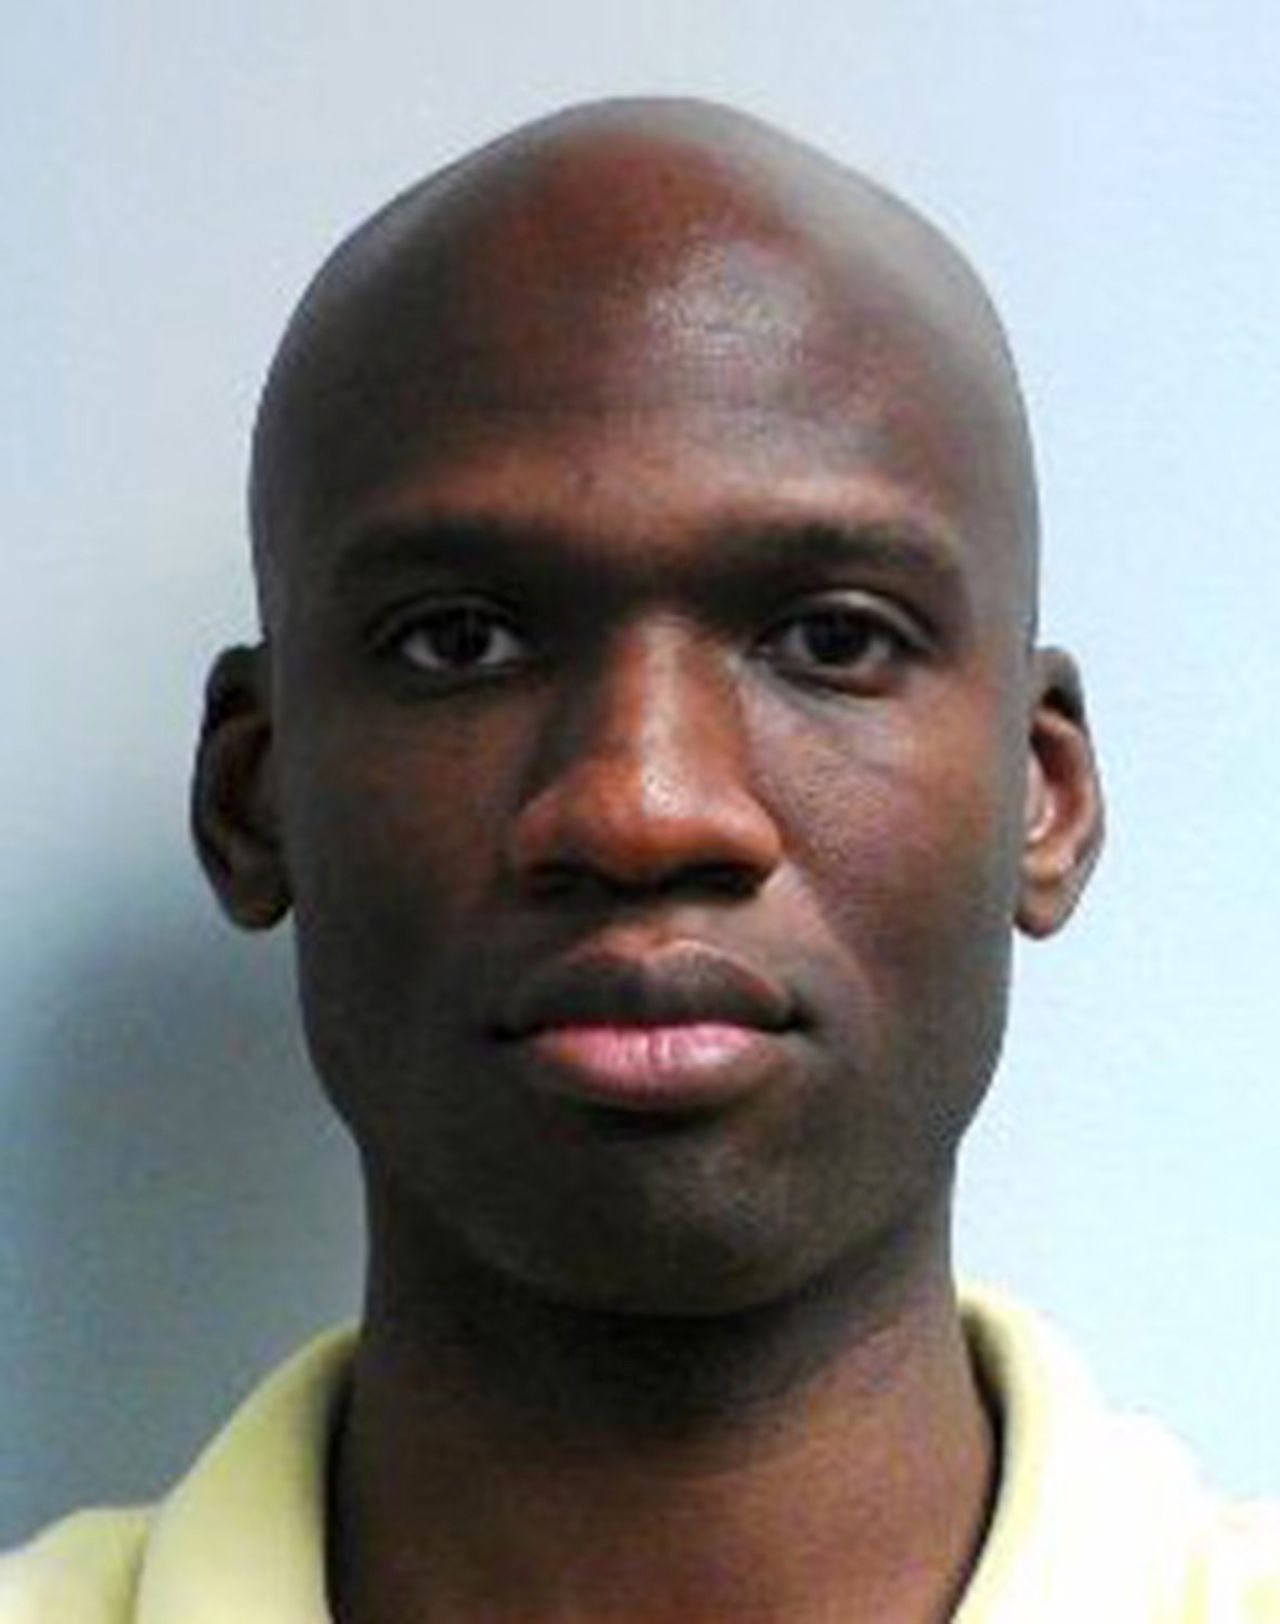 The FBI identified Aaron Alexis, a 34-year-old military contractor from Texas, as the perpetrator of the shooting rampage at the Washington Navy Yard on Monday, September 16. Authorities said at least 12 people -- and Alexis -- were killed in the shooting.